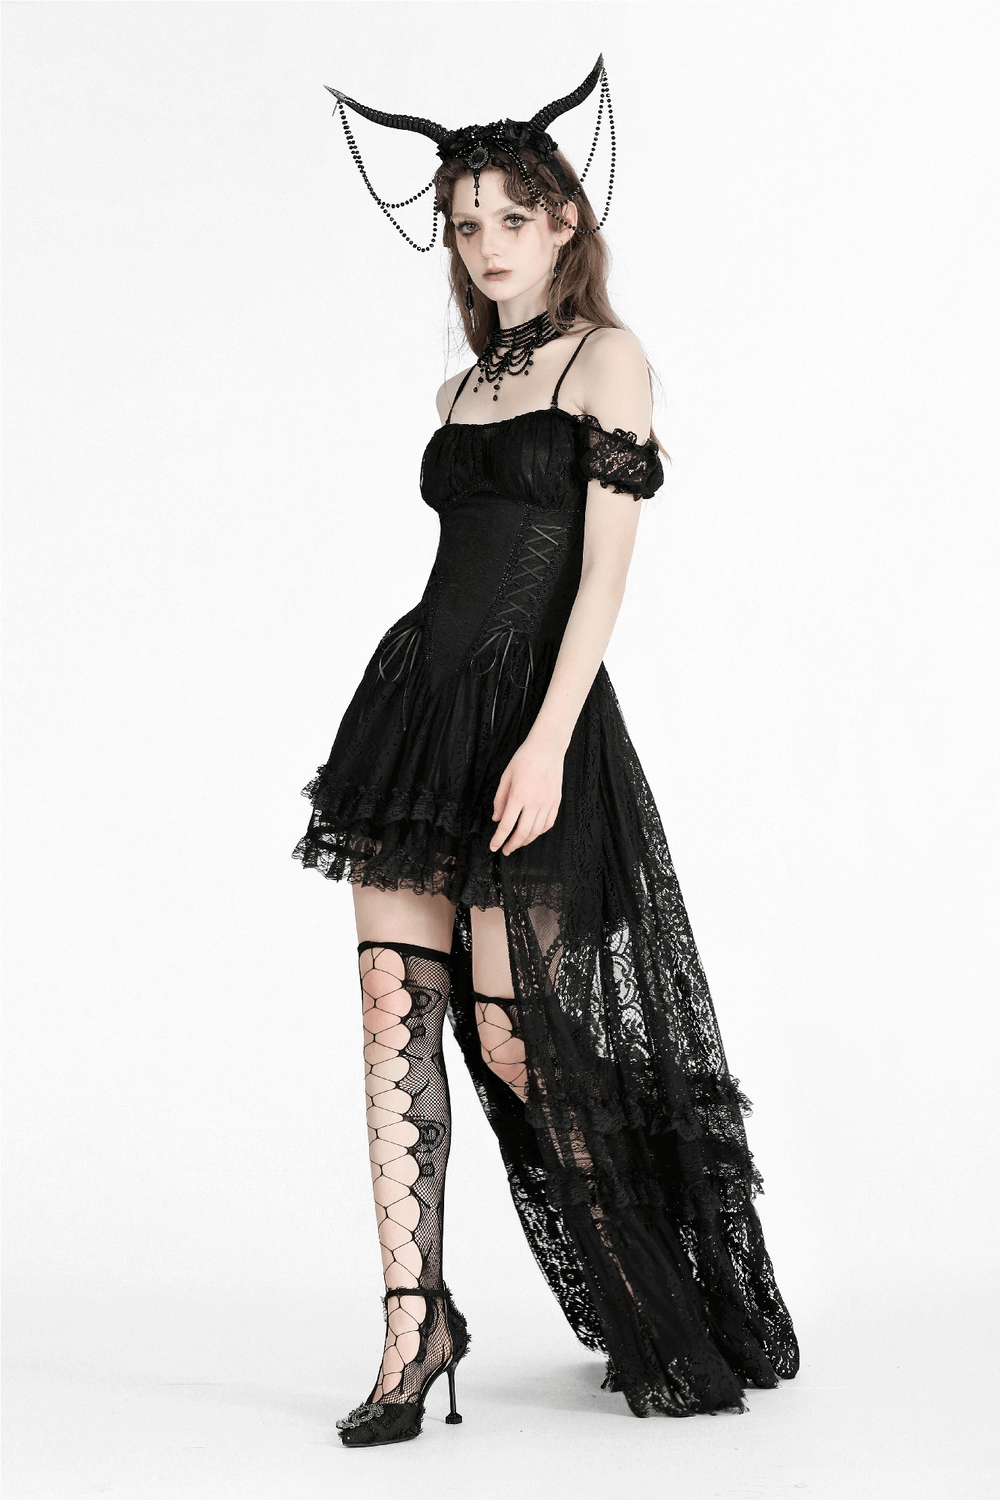 Gothic Off-Shoulder Lace High-Low Dress for Women